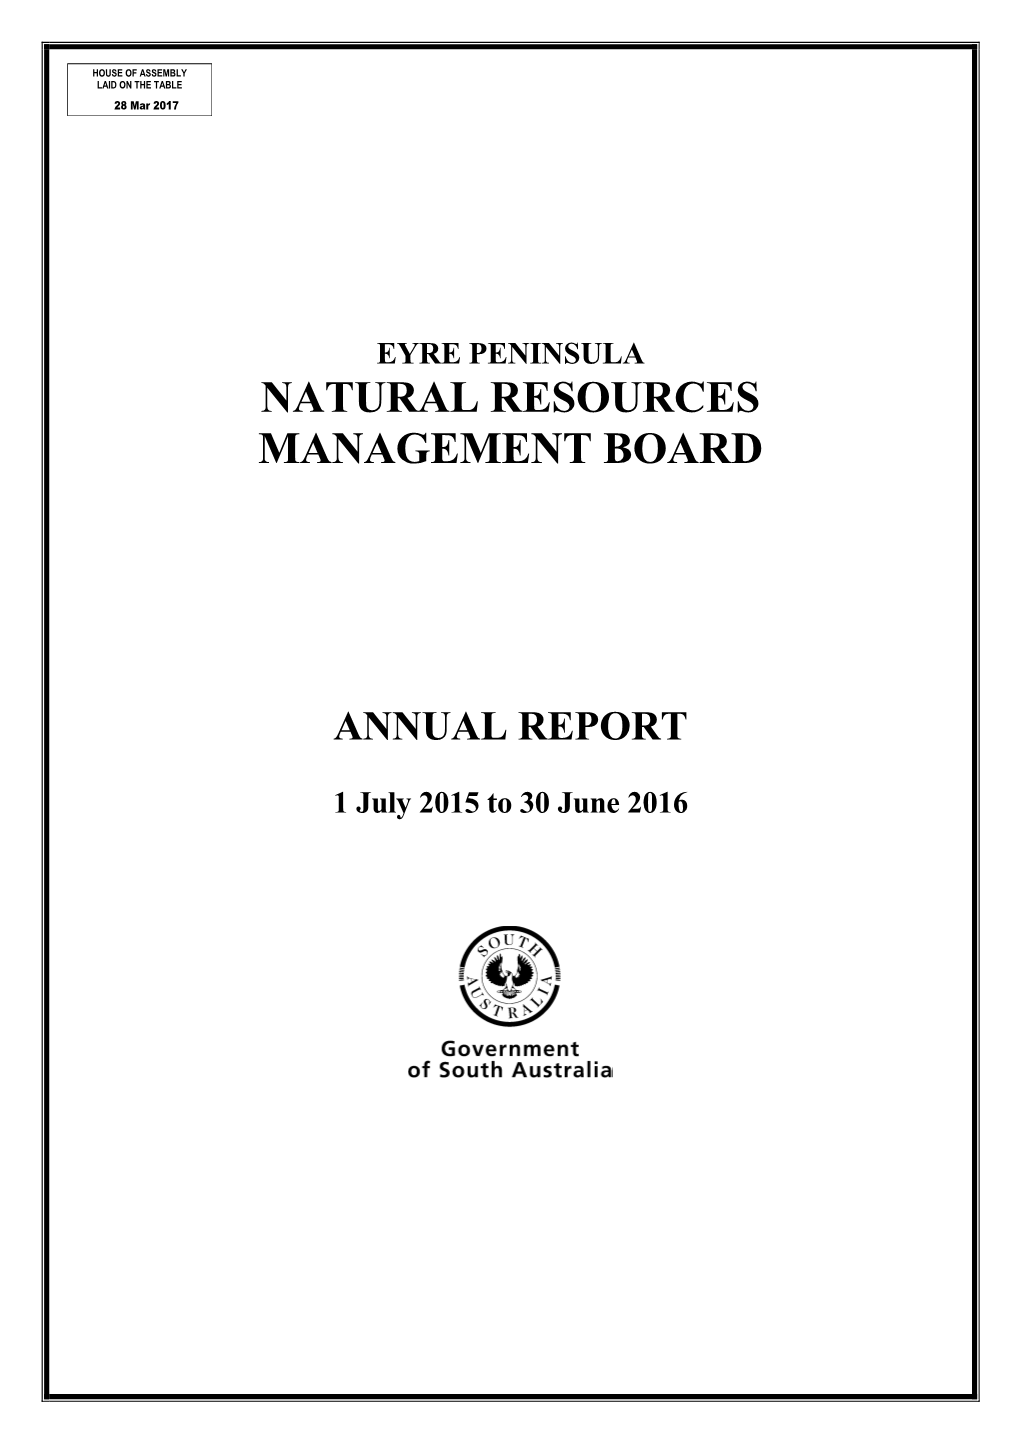 Natural Resources Management Board